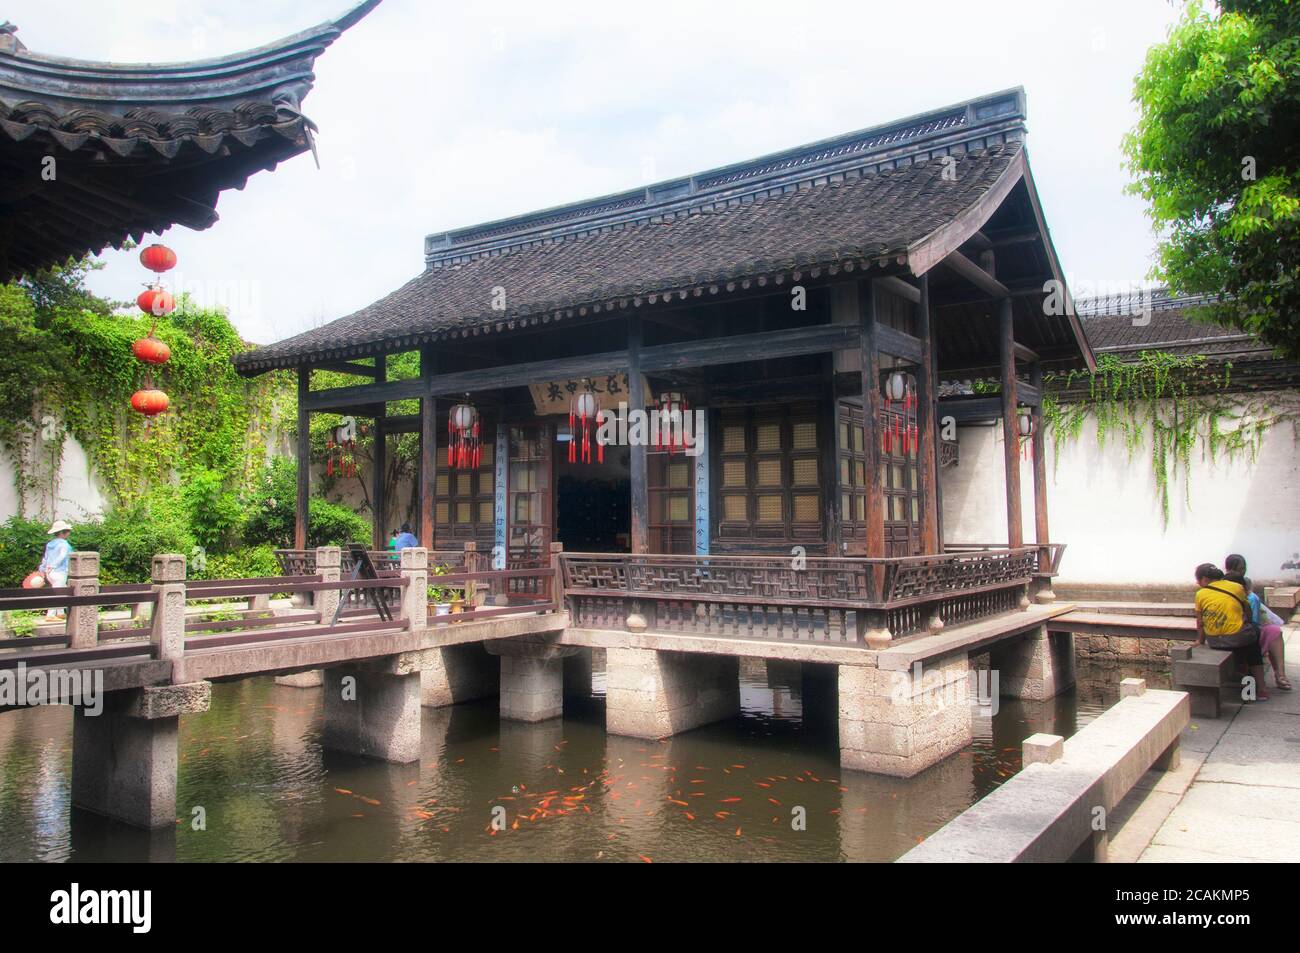 Shaoxing, China.  August 26, 2016. The famous birthplace of Lu Xun in Shaoxing china in zhejiang province on a sunny day. Stock Photo